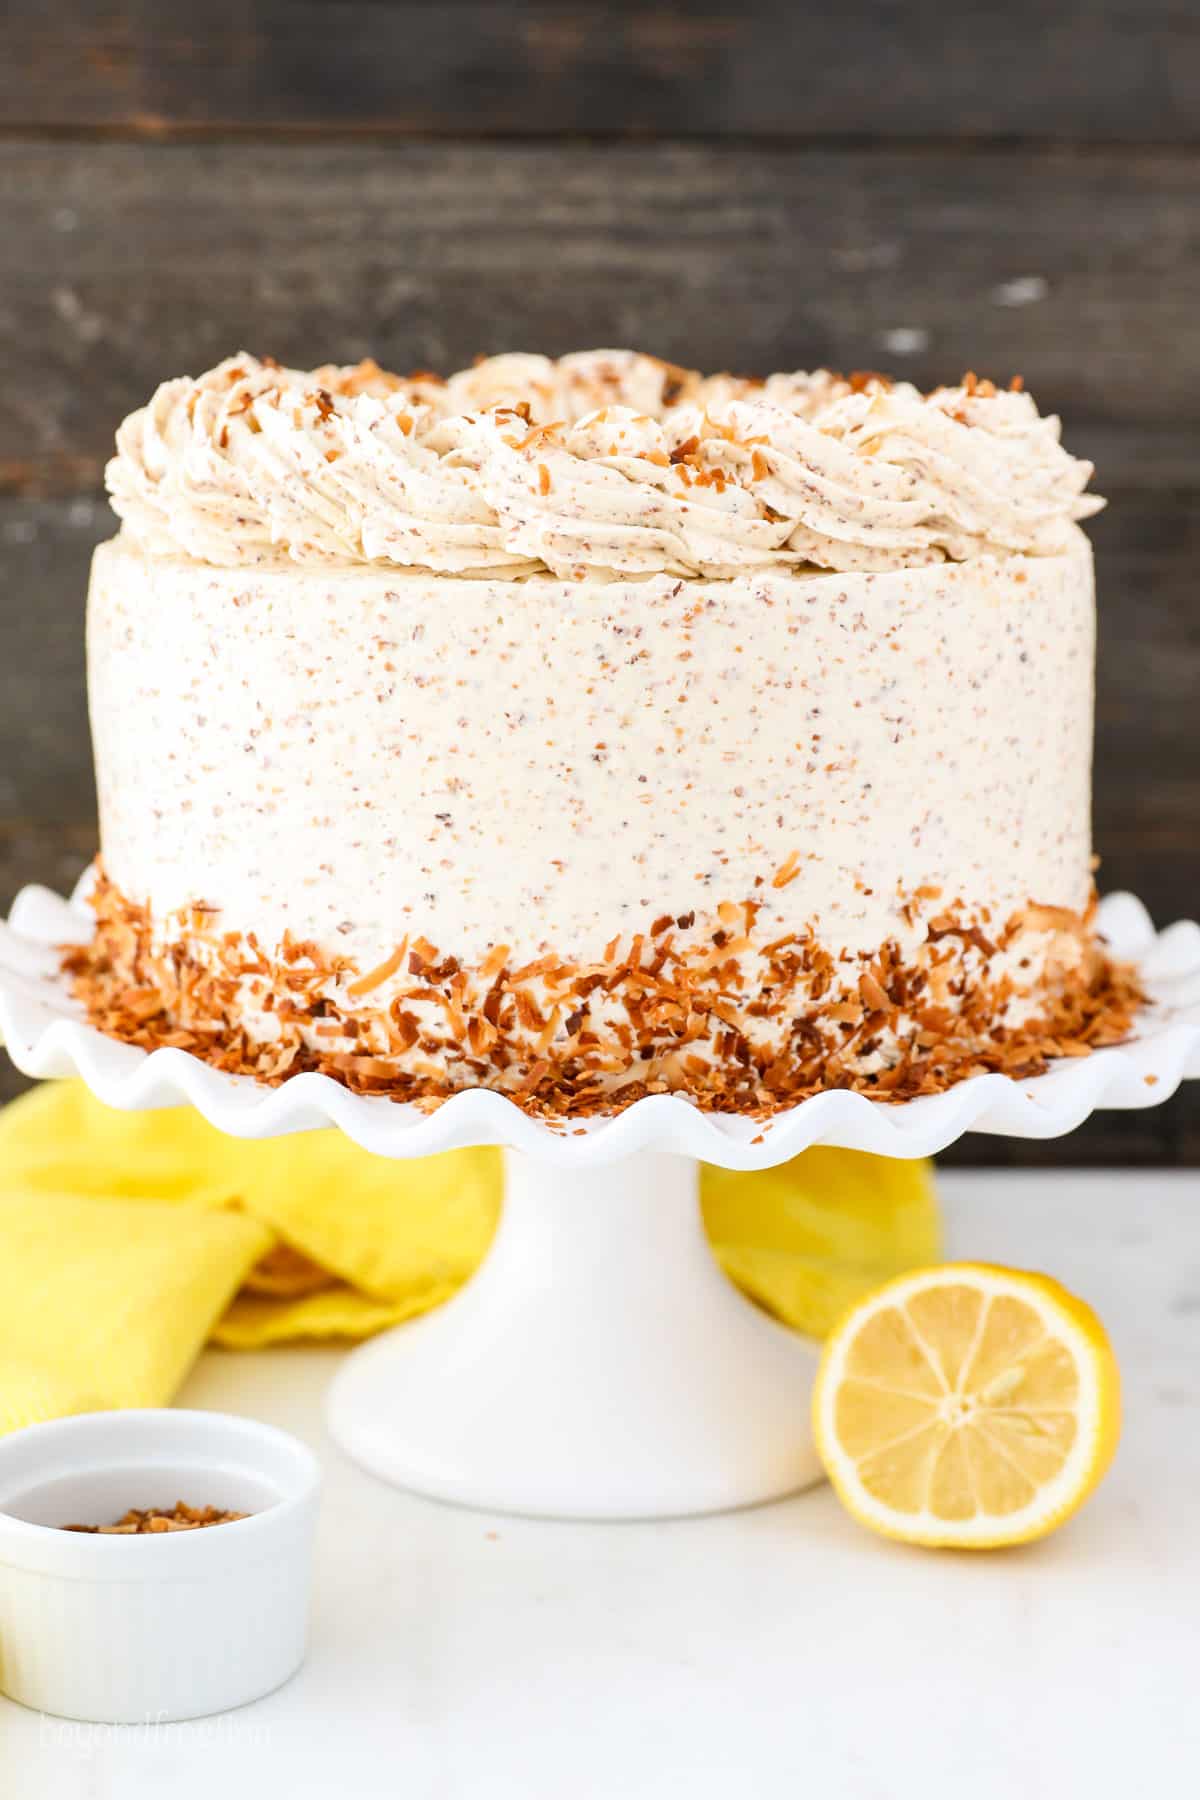 Frosted lemon coconut cake decorated with a skirt of toasted coconut on a white cake stand, on a countertop next to two lemon halves.